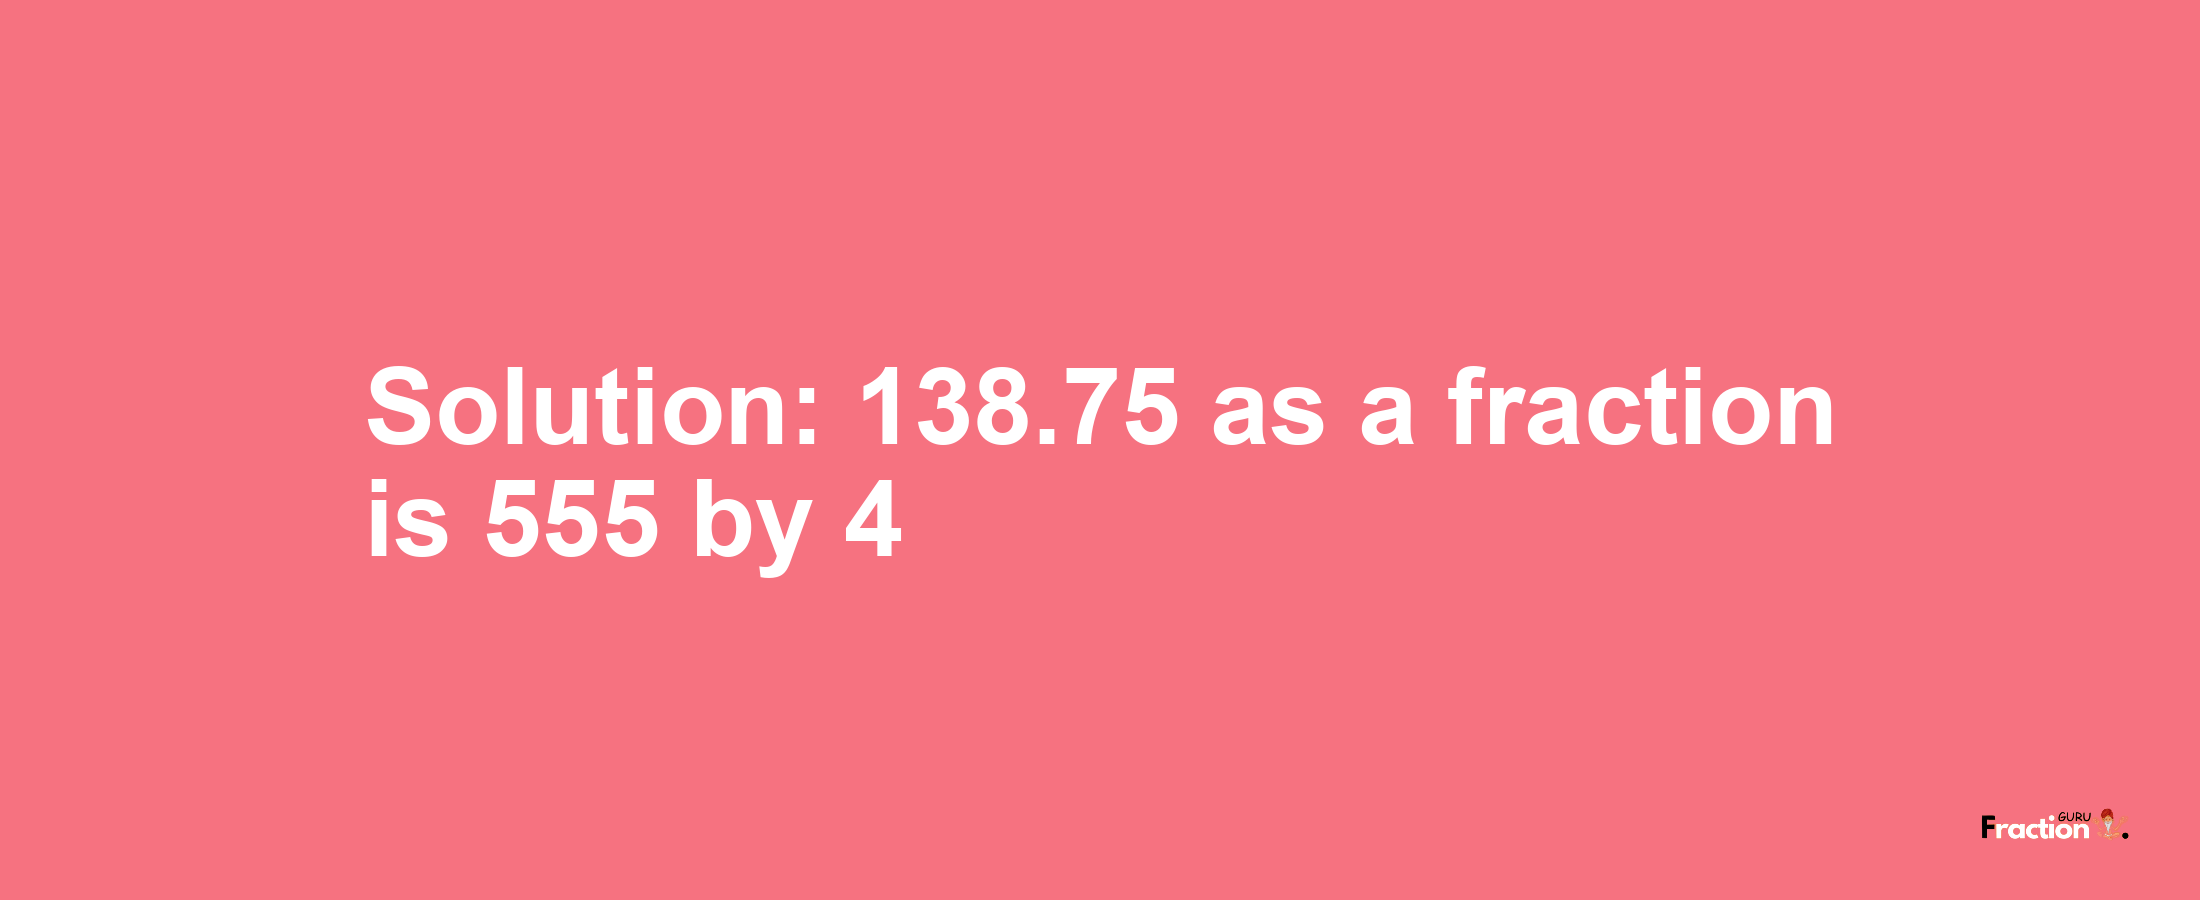 Solution:138.75 as a fraction is 555/4